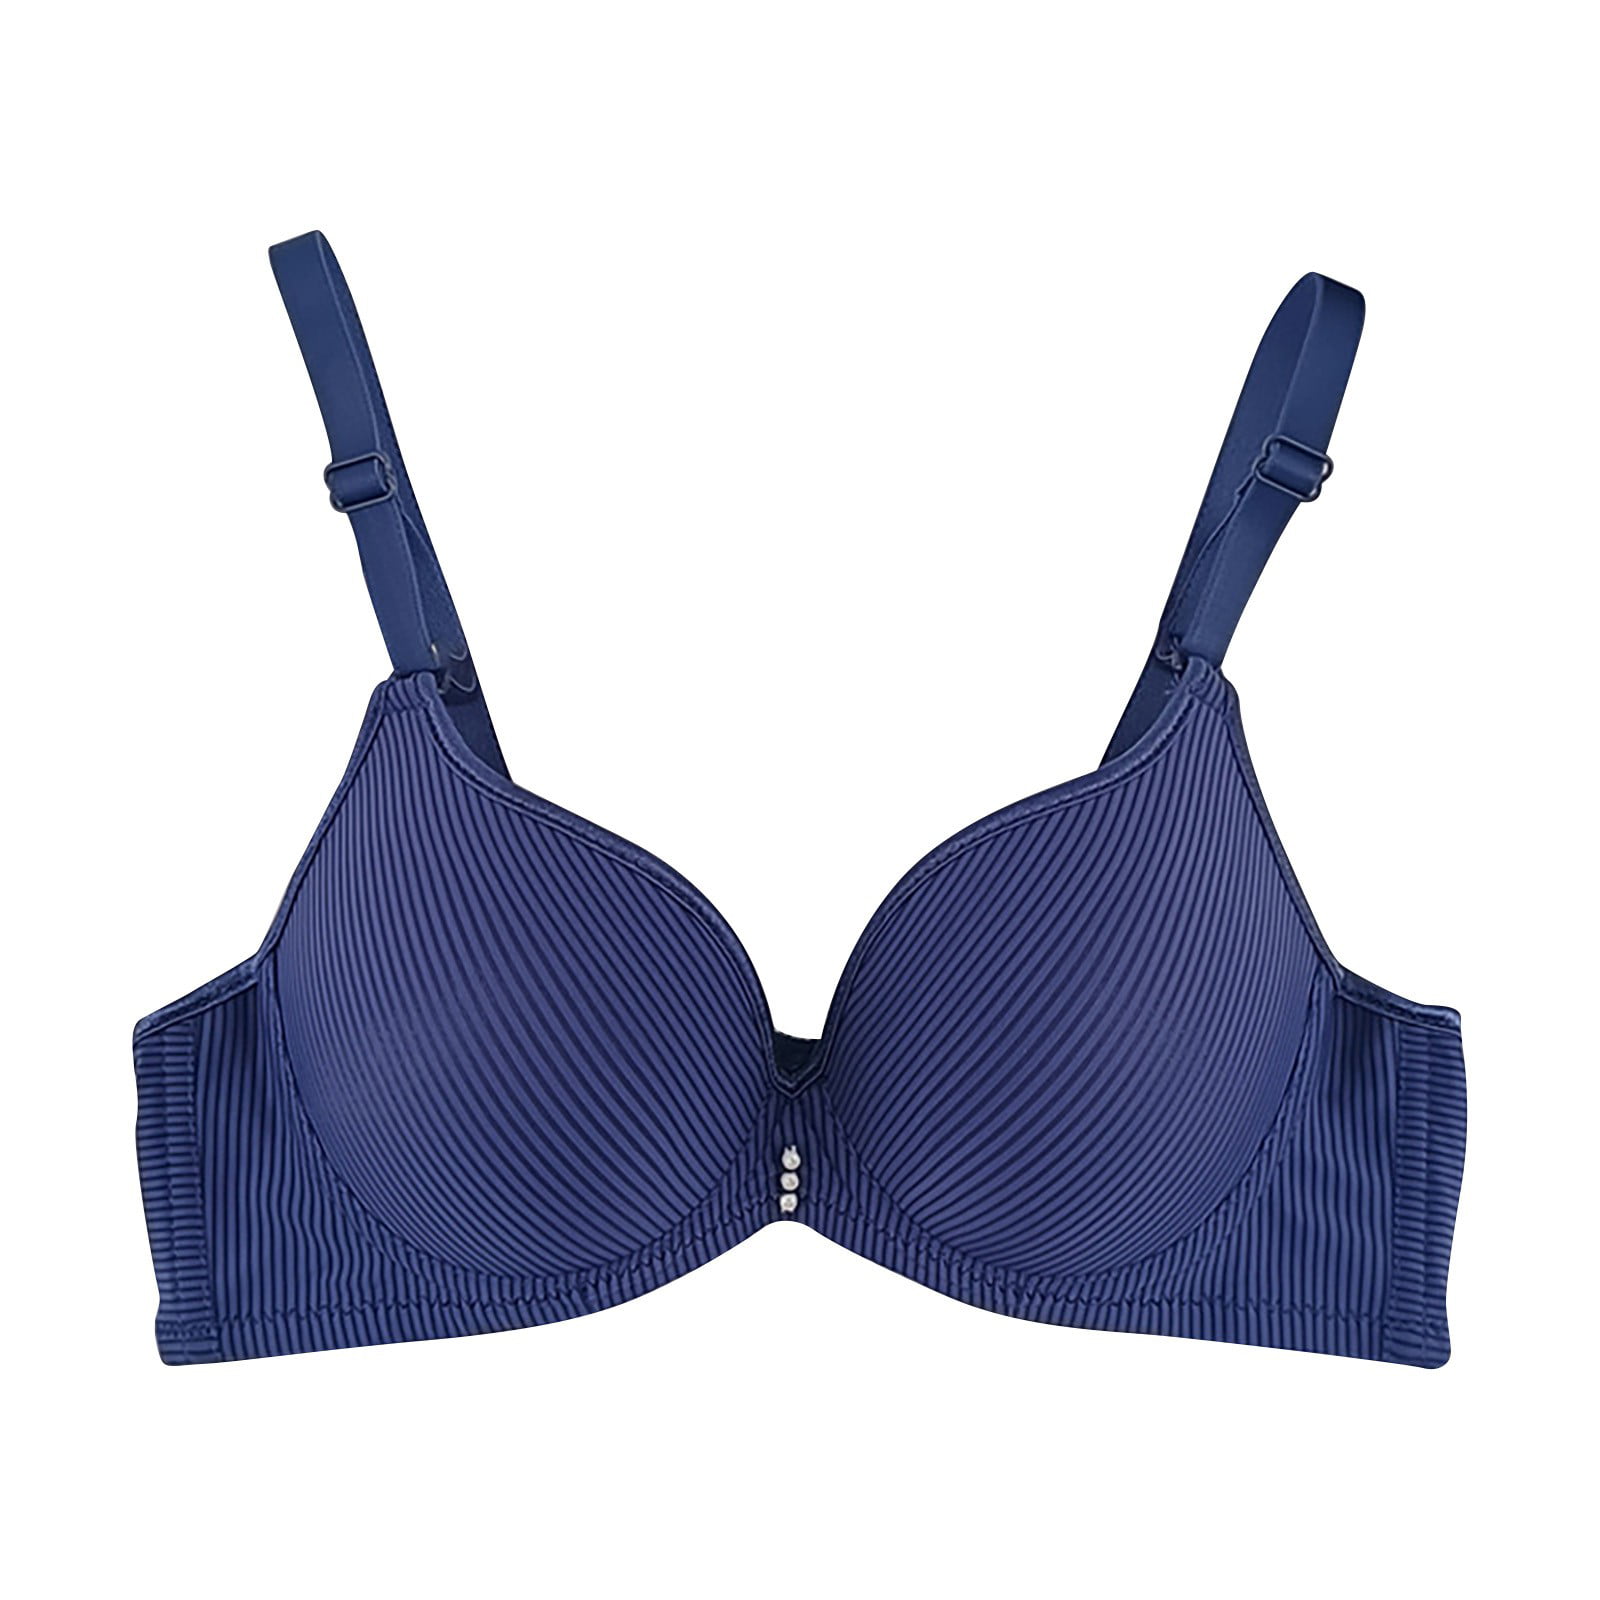 Reduced Price in T-shirt Bras